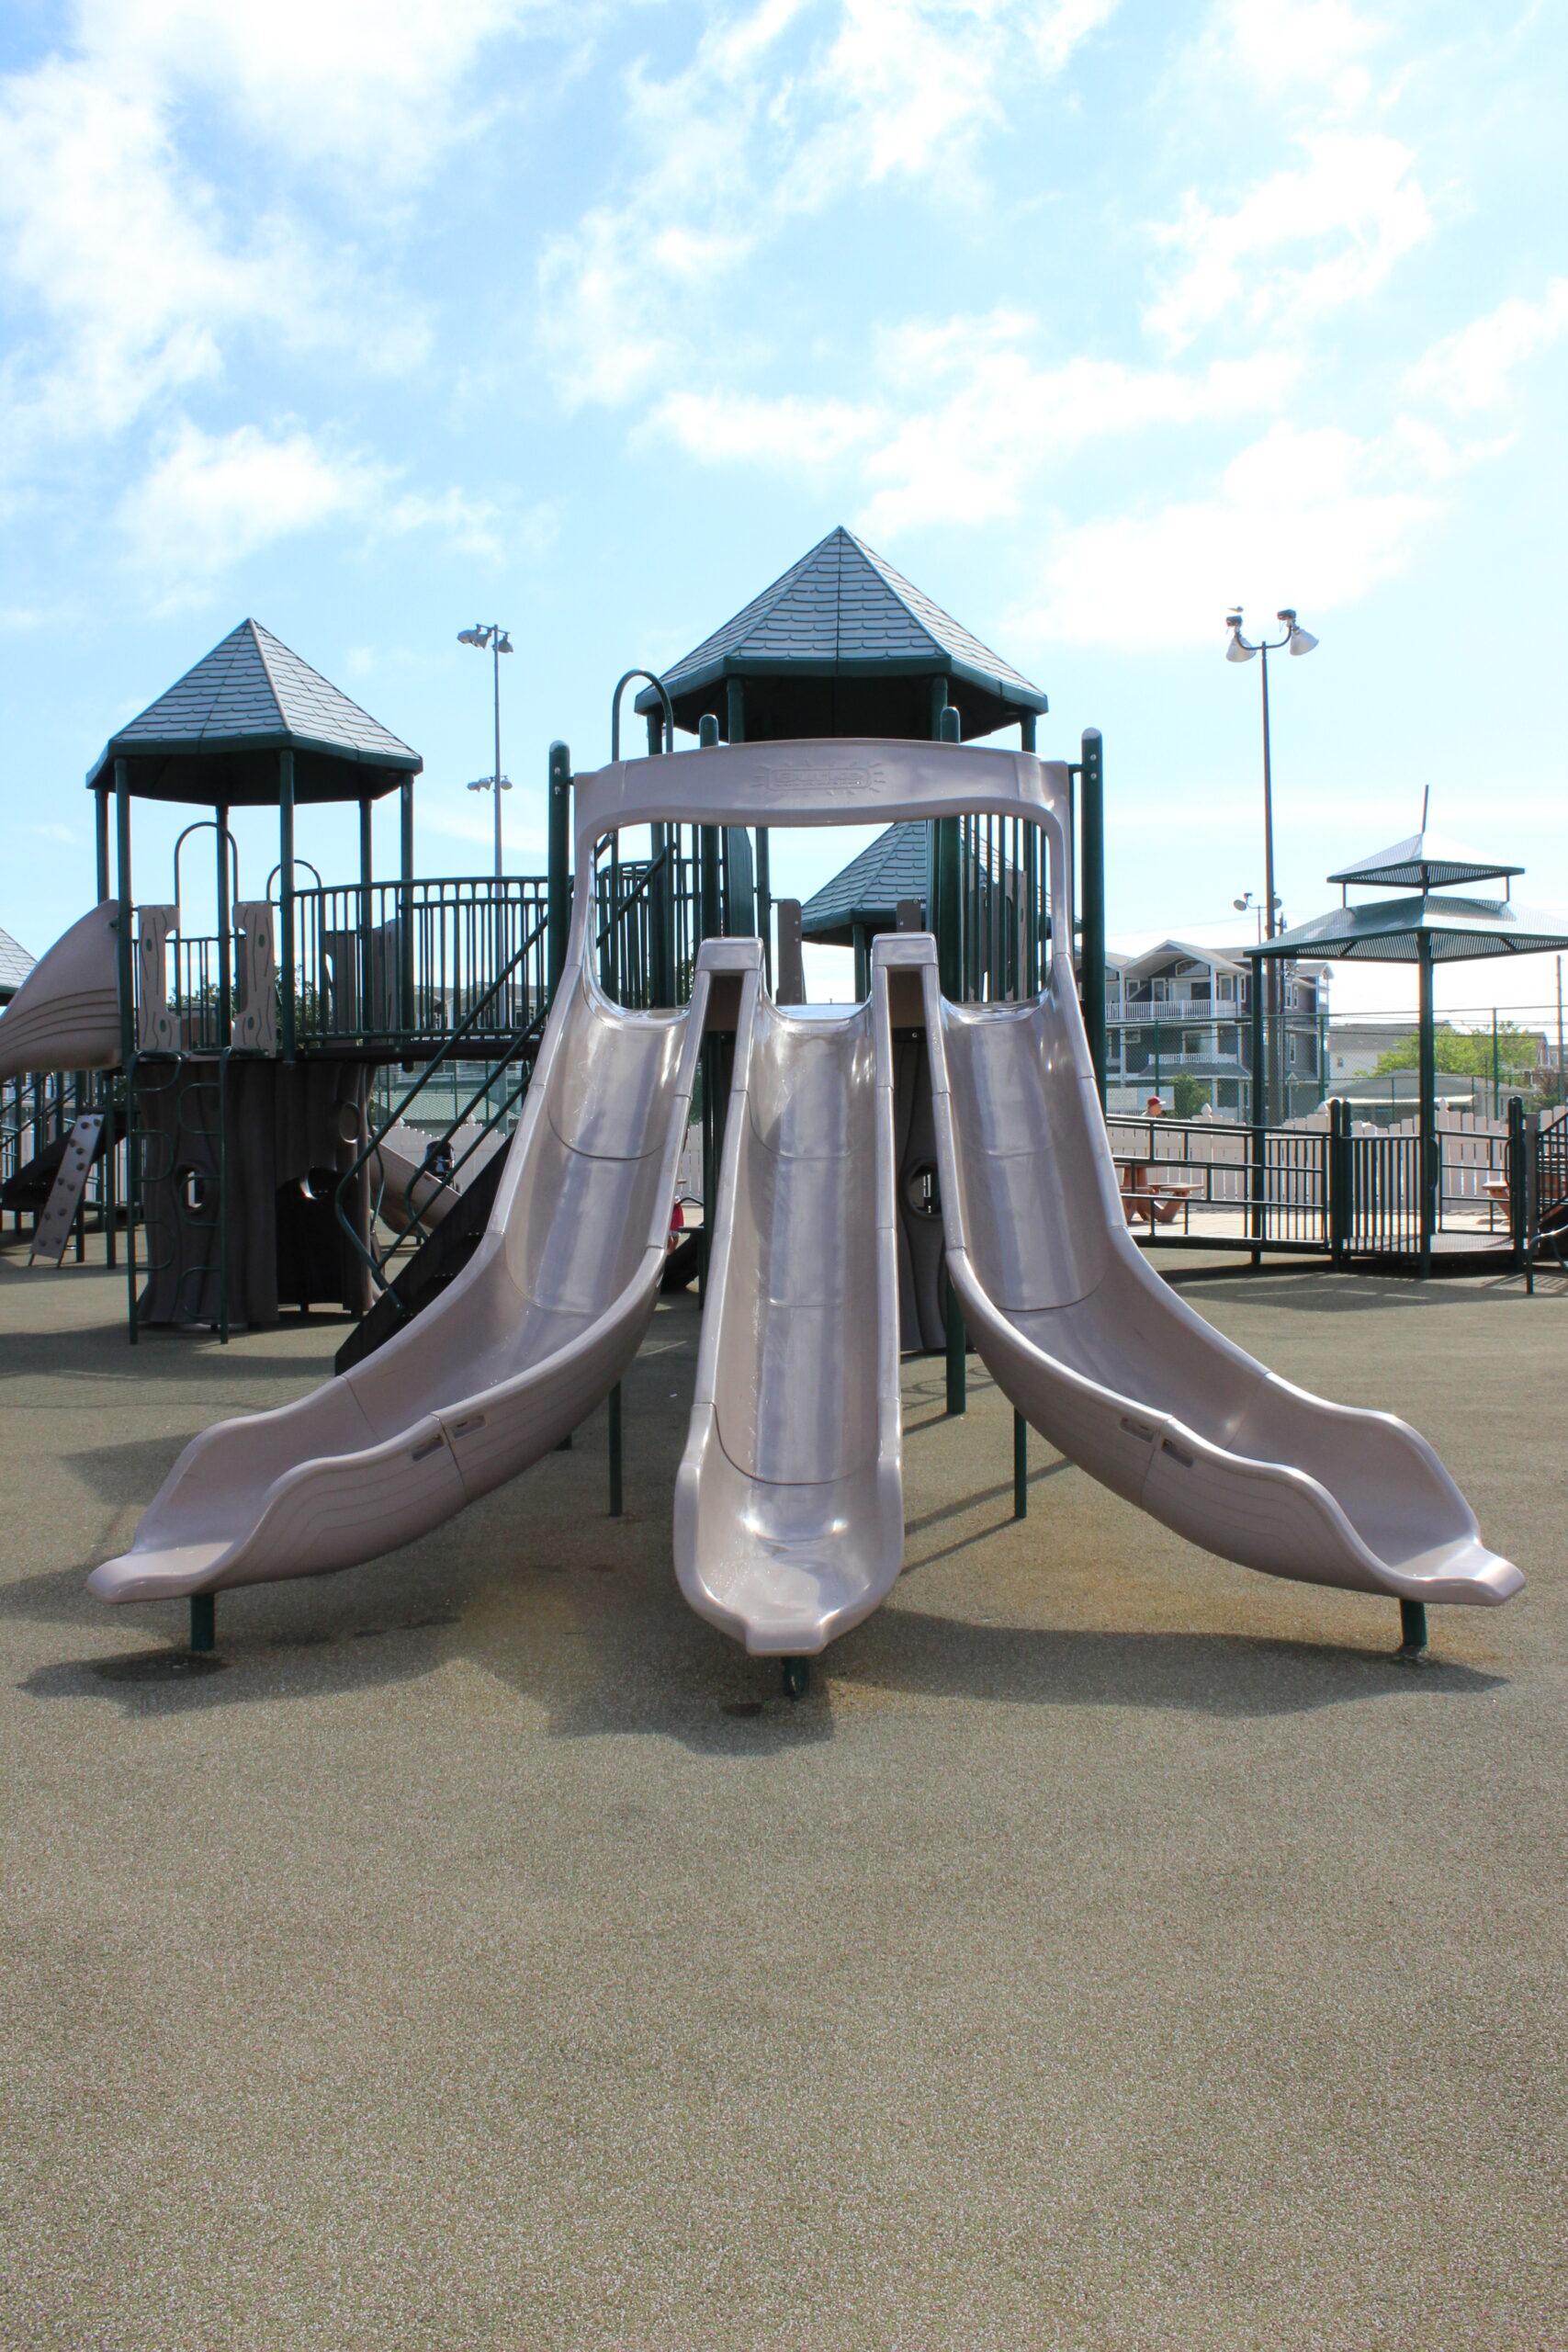 Dealy Field Playground in Sea Isle City NJ - SLIDES - 3 slides together TALL image